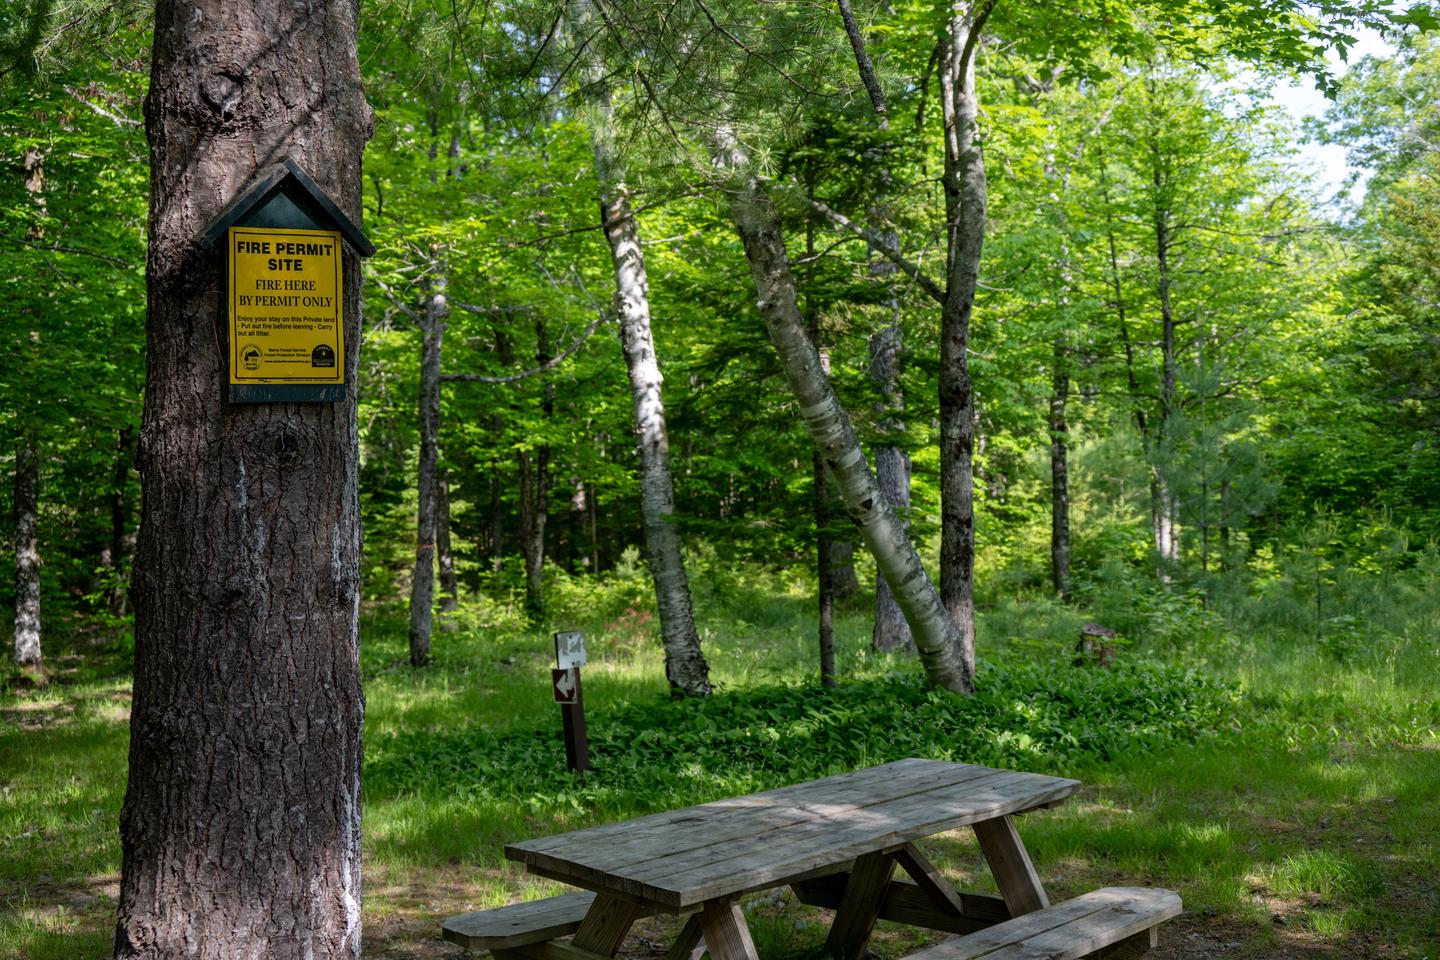 A yellow fire permit site sign attached to a tree next to a picnic table. The sign reminds campers that a fire permit is required at the campsite.A fire permit is required at this site.